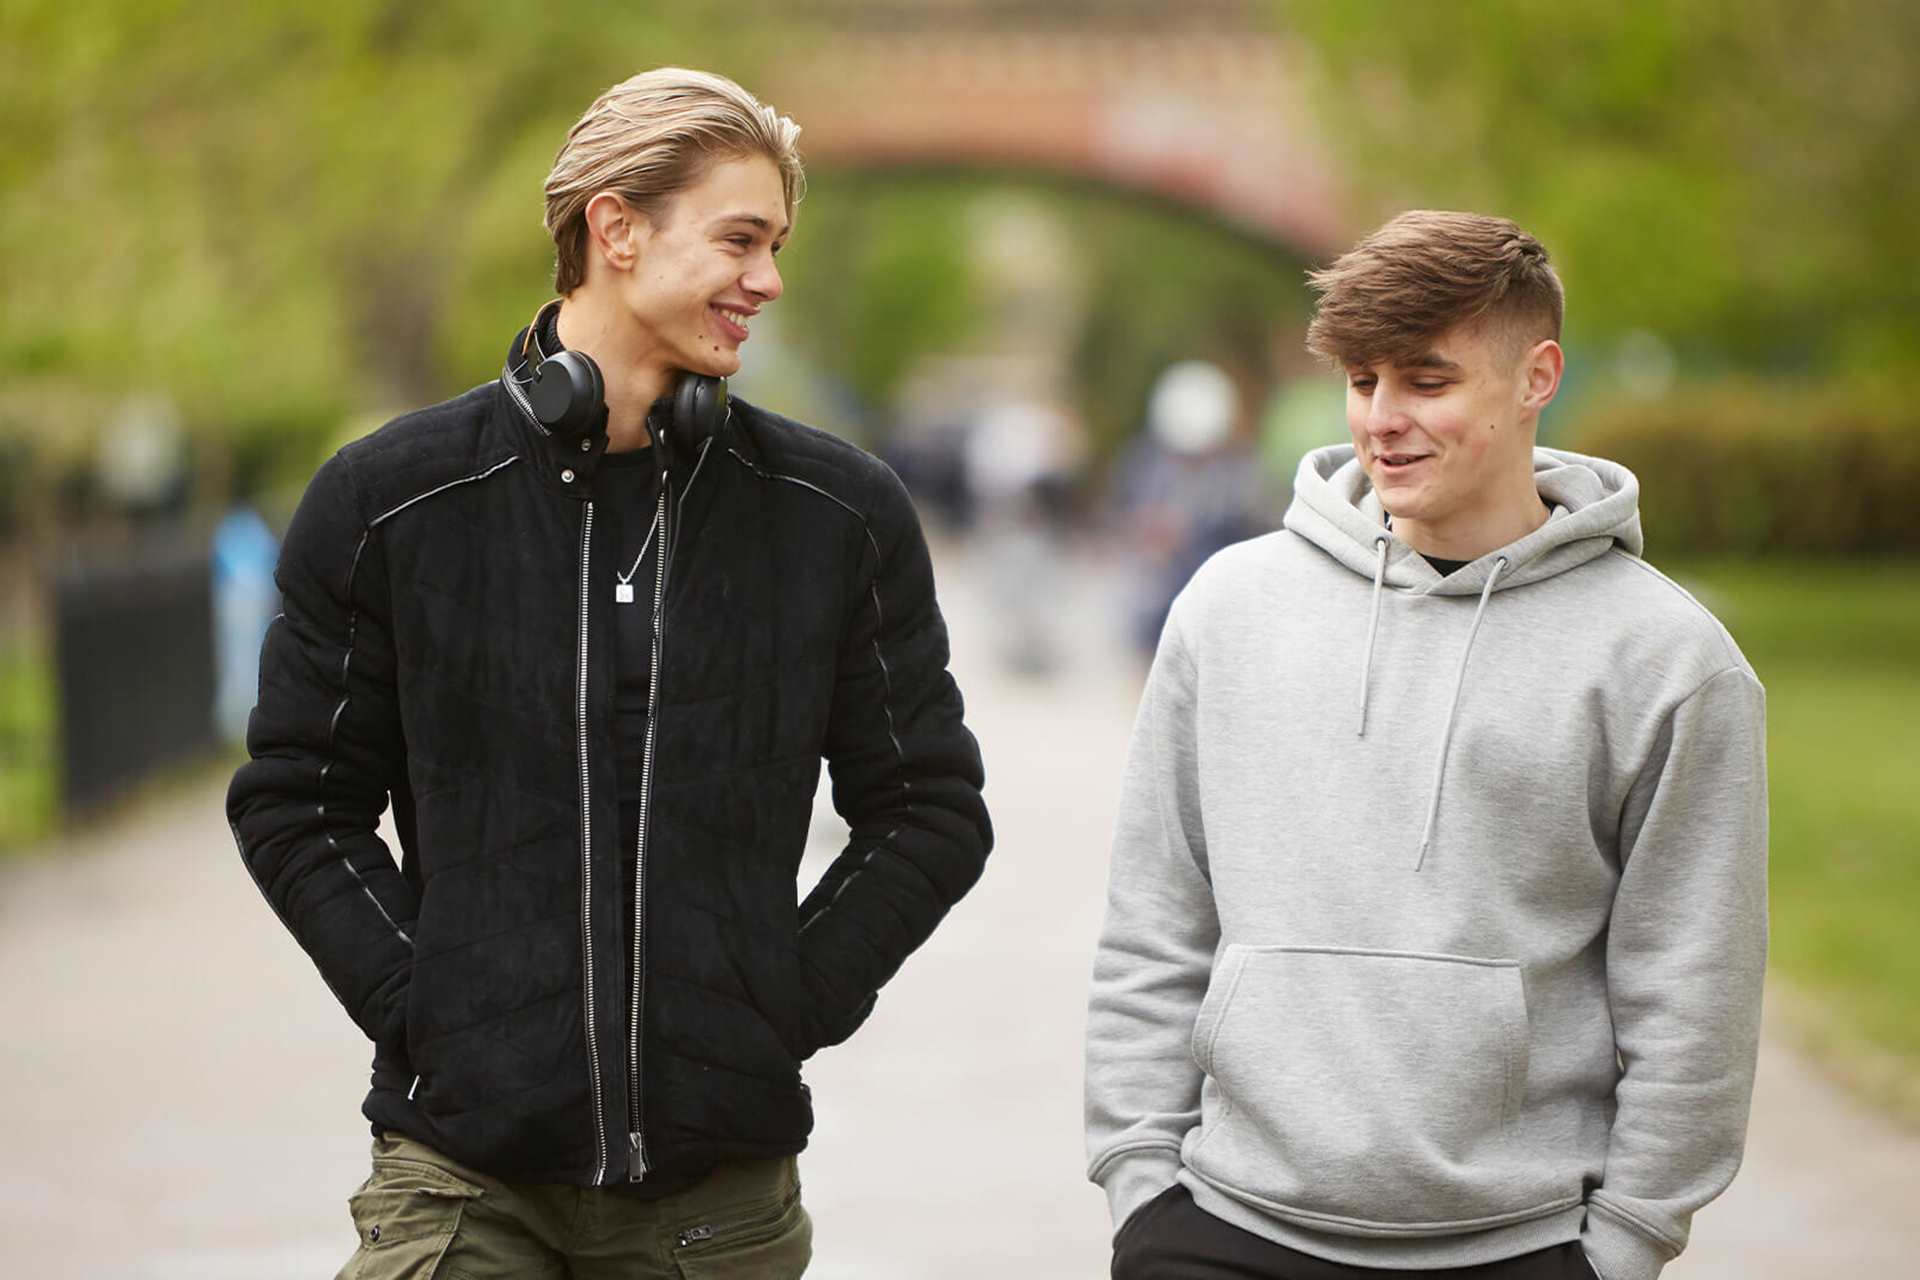 two-young-man-wearing-grey-hoodie-and-black-jacket-walking-and-laughing-on-a-street